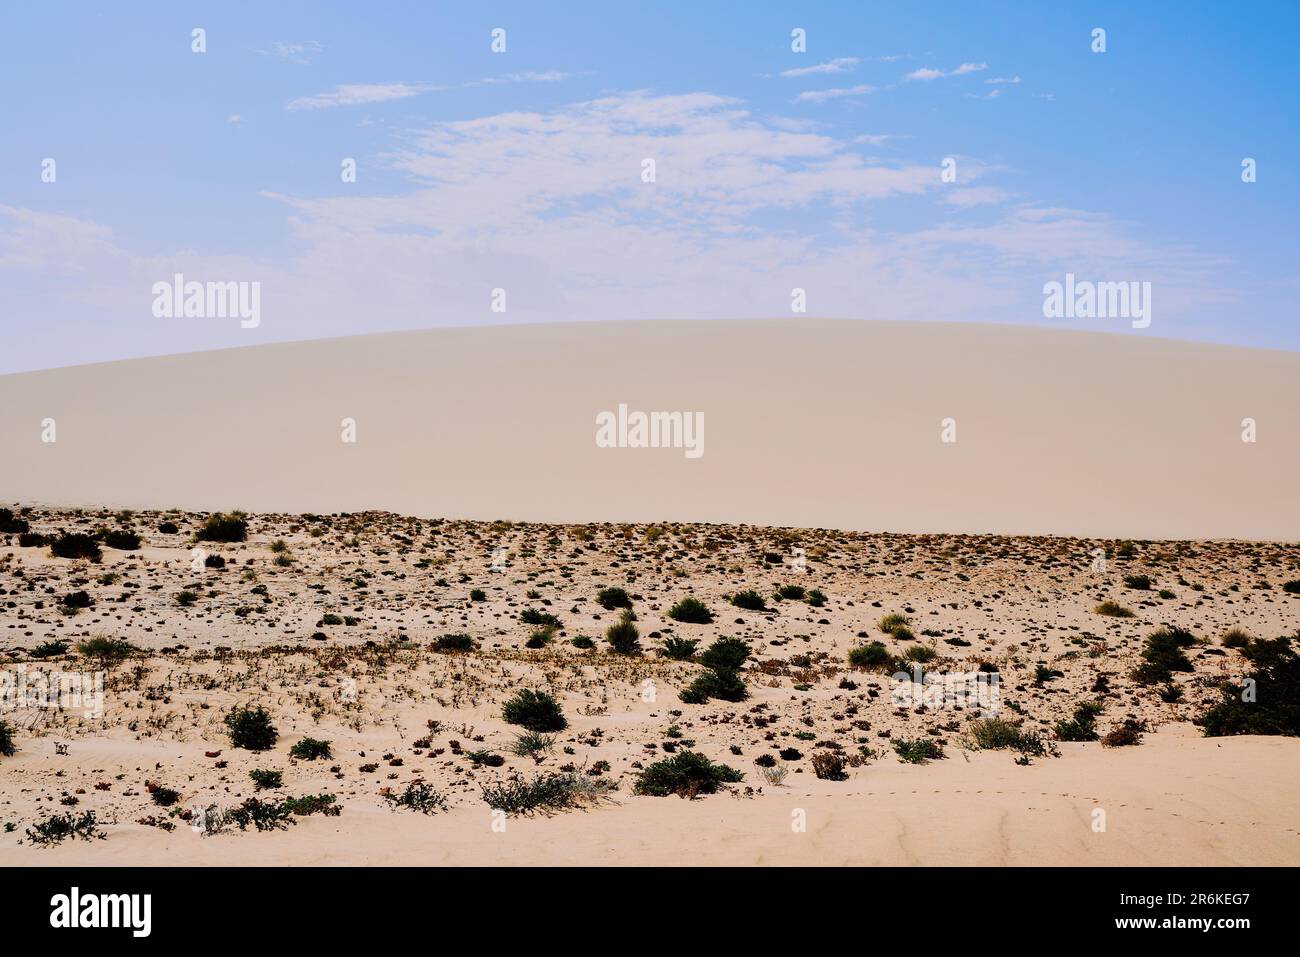 Dune formation at the desert with a blue sky Stock Photo